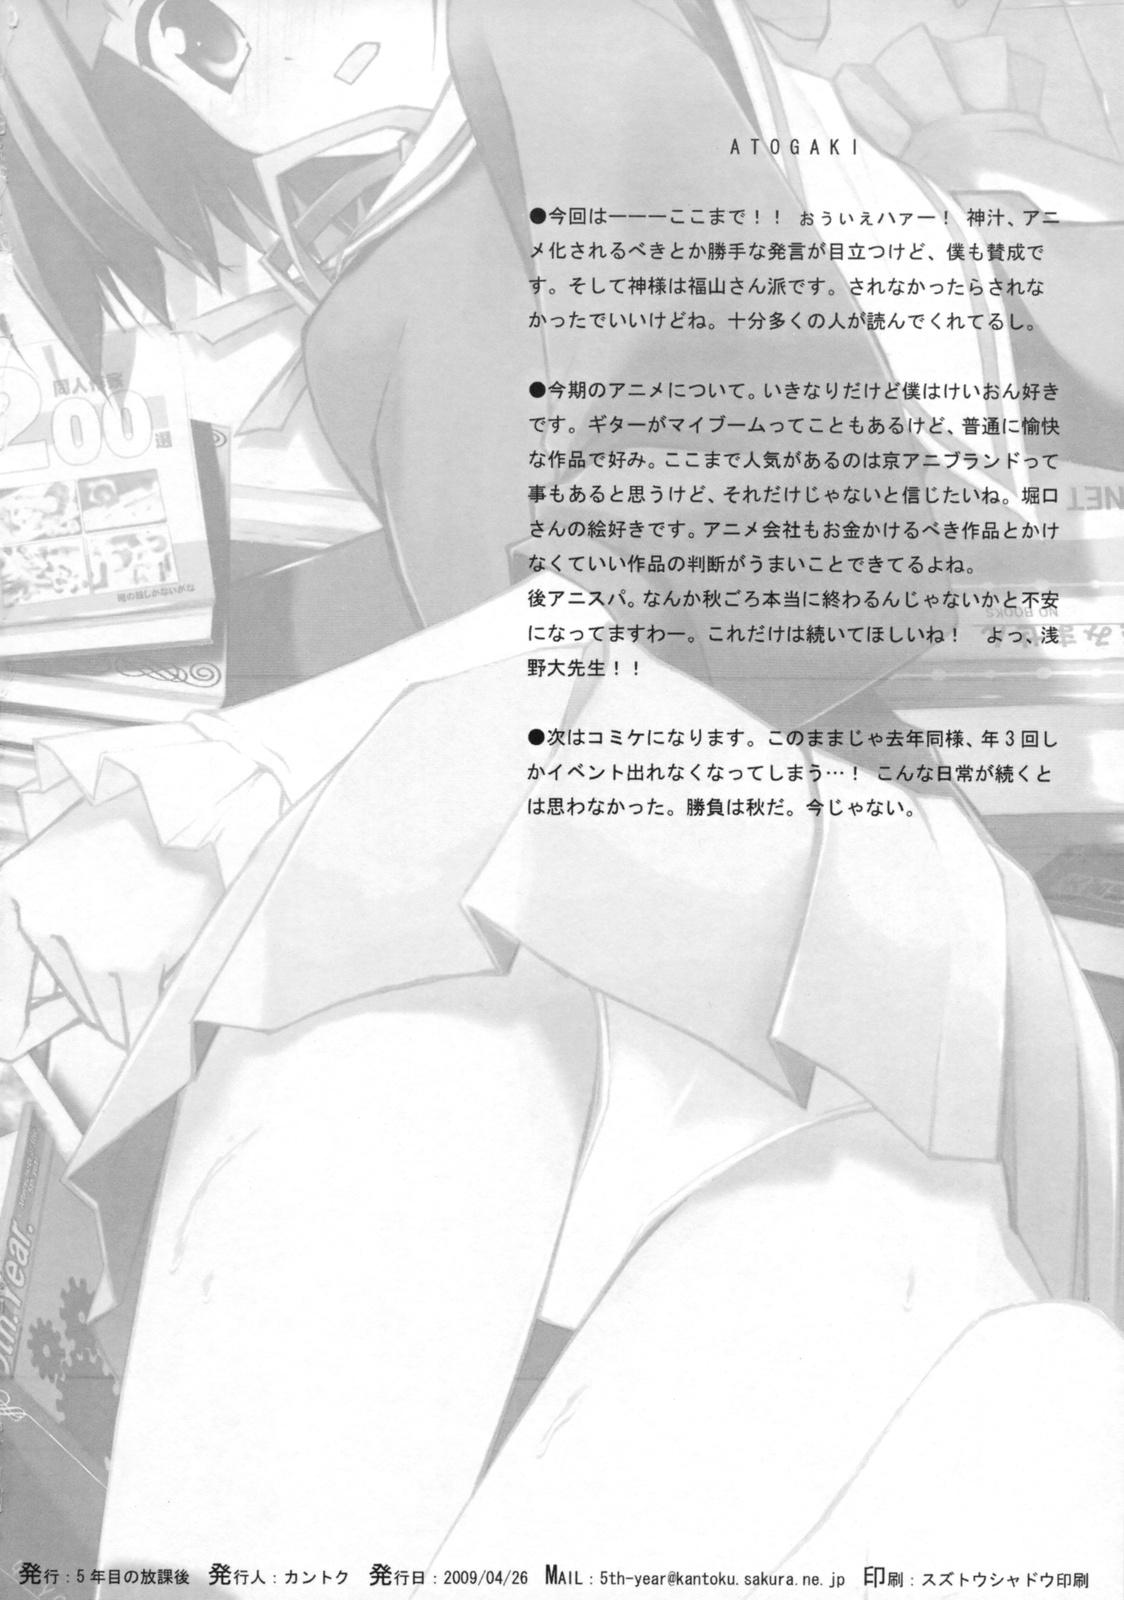 Bedroom Tachiyomi Senyou Vol. 28 - The world god only knows Telugu - Page 21